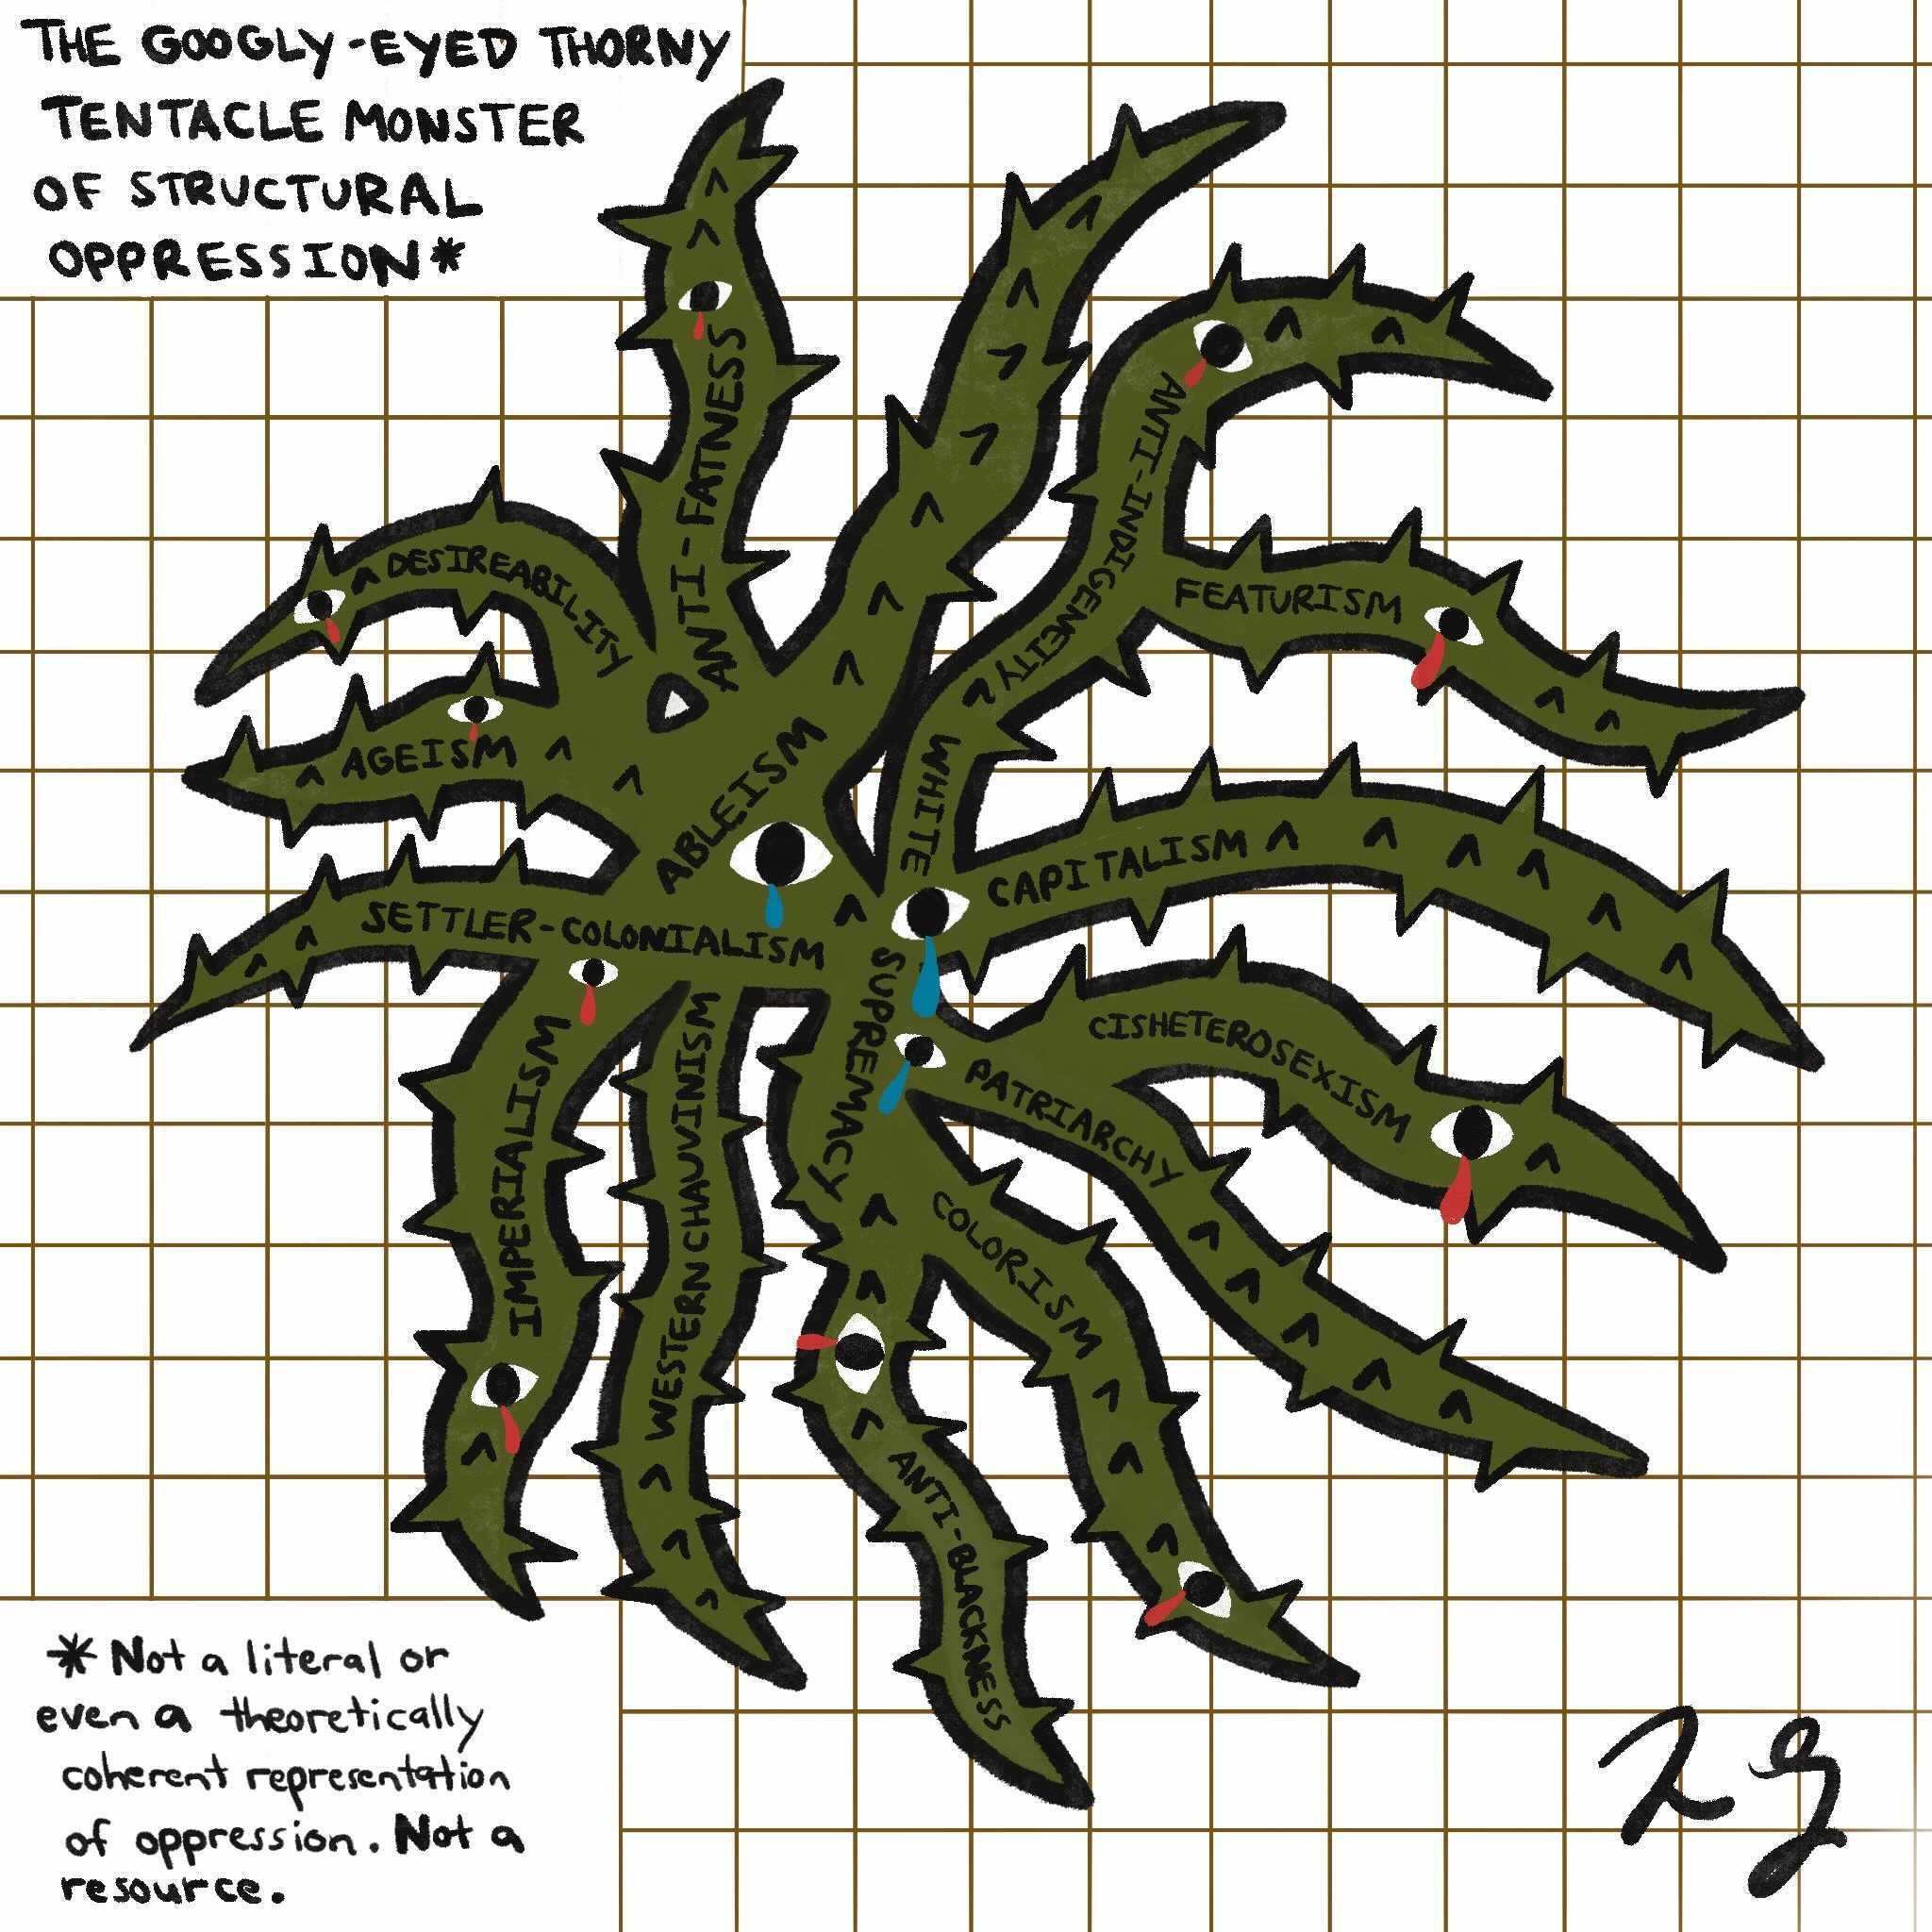 Illustration of the Googly-Eyed Thorny Tentacle Monster of Structural Oppression.